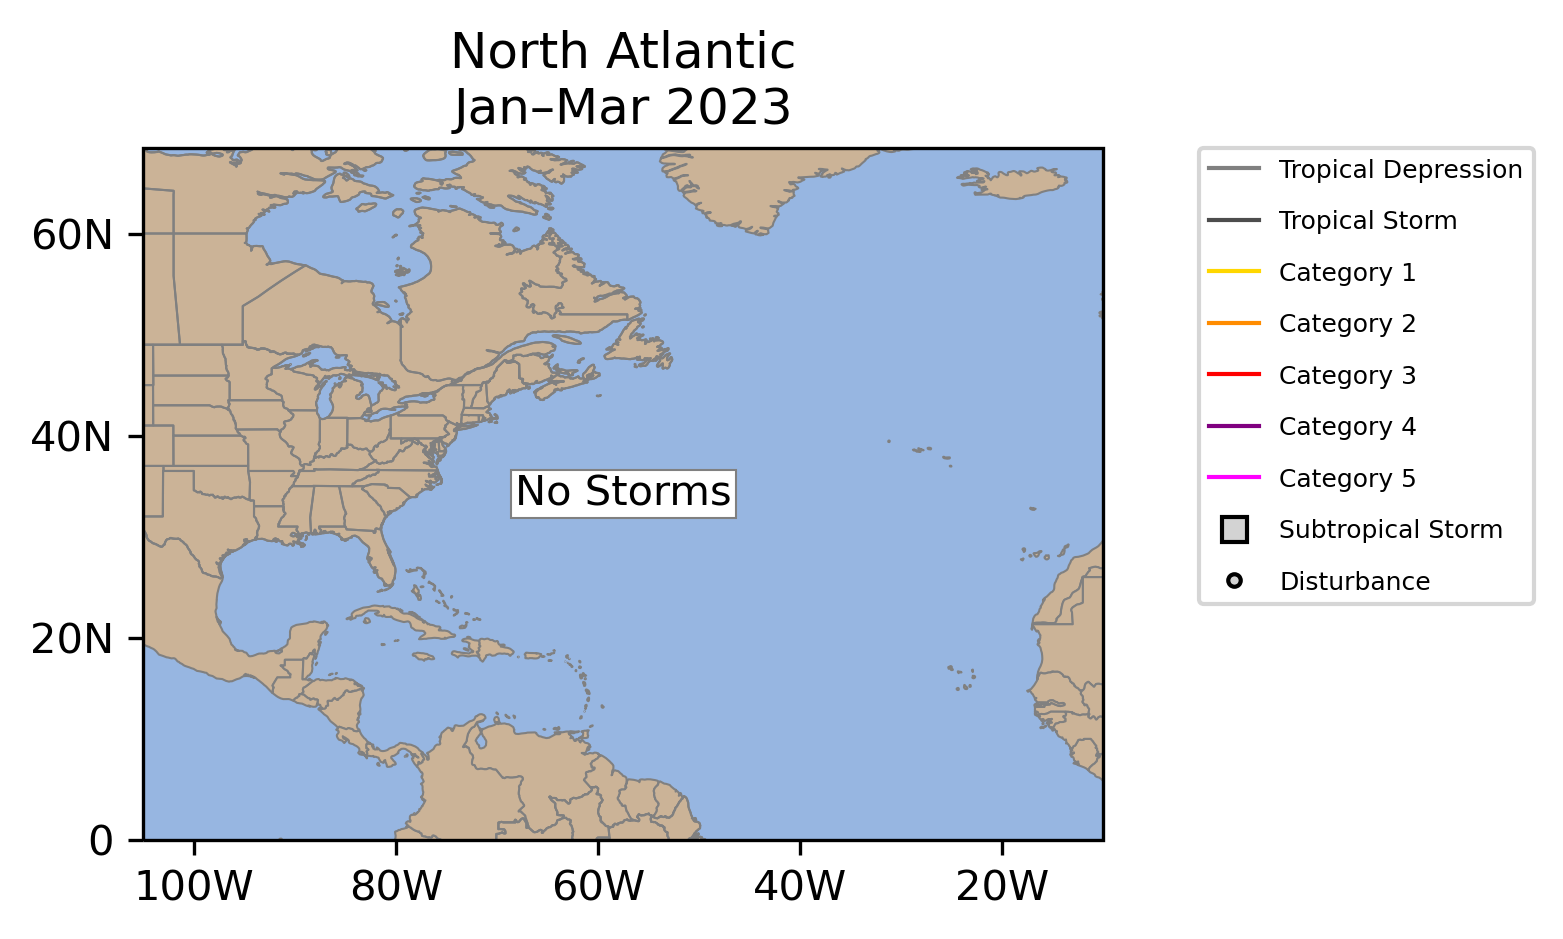 North Atlantic Tropical Cyclone Storm Tracks January-March 2023